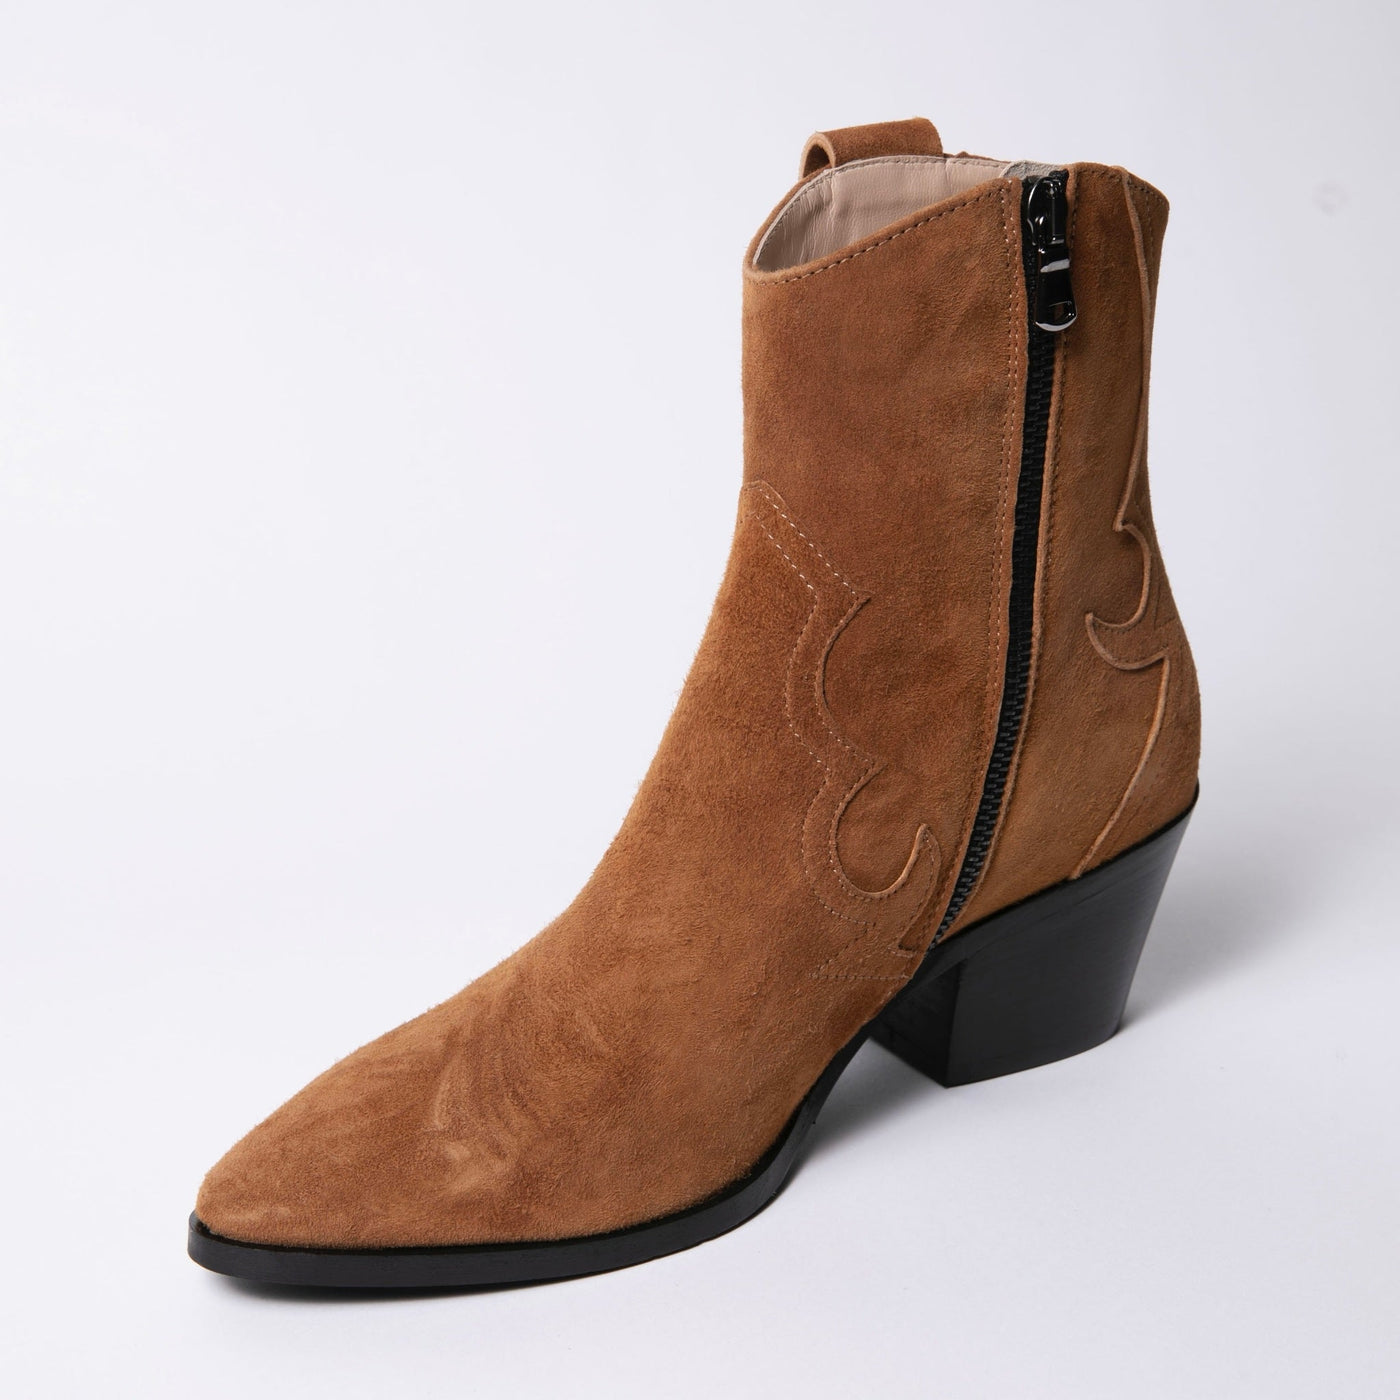 Short Cowboy Boots in Cognac Suede. Featuring western stiching. 